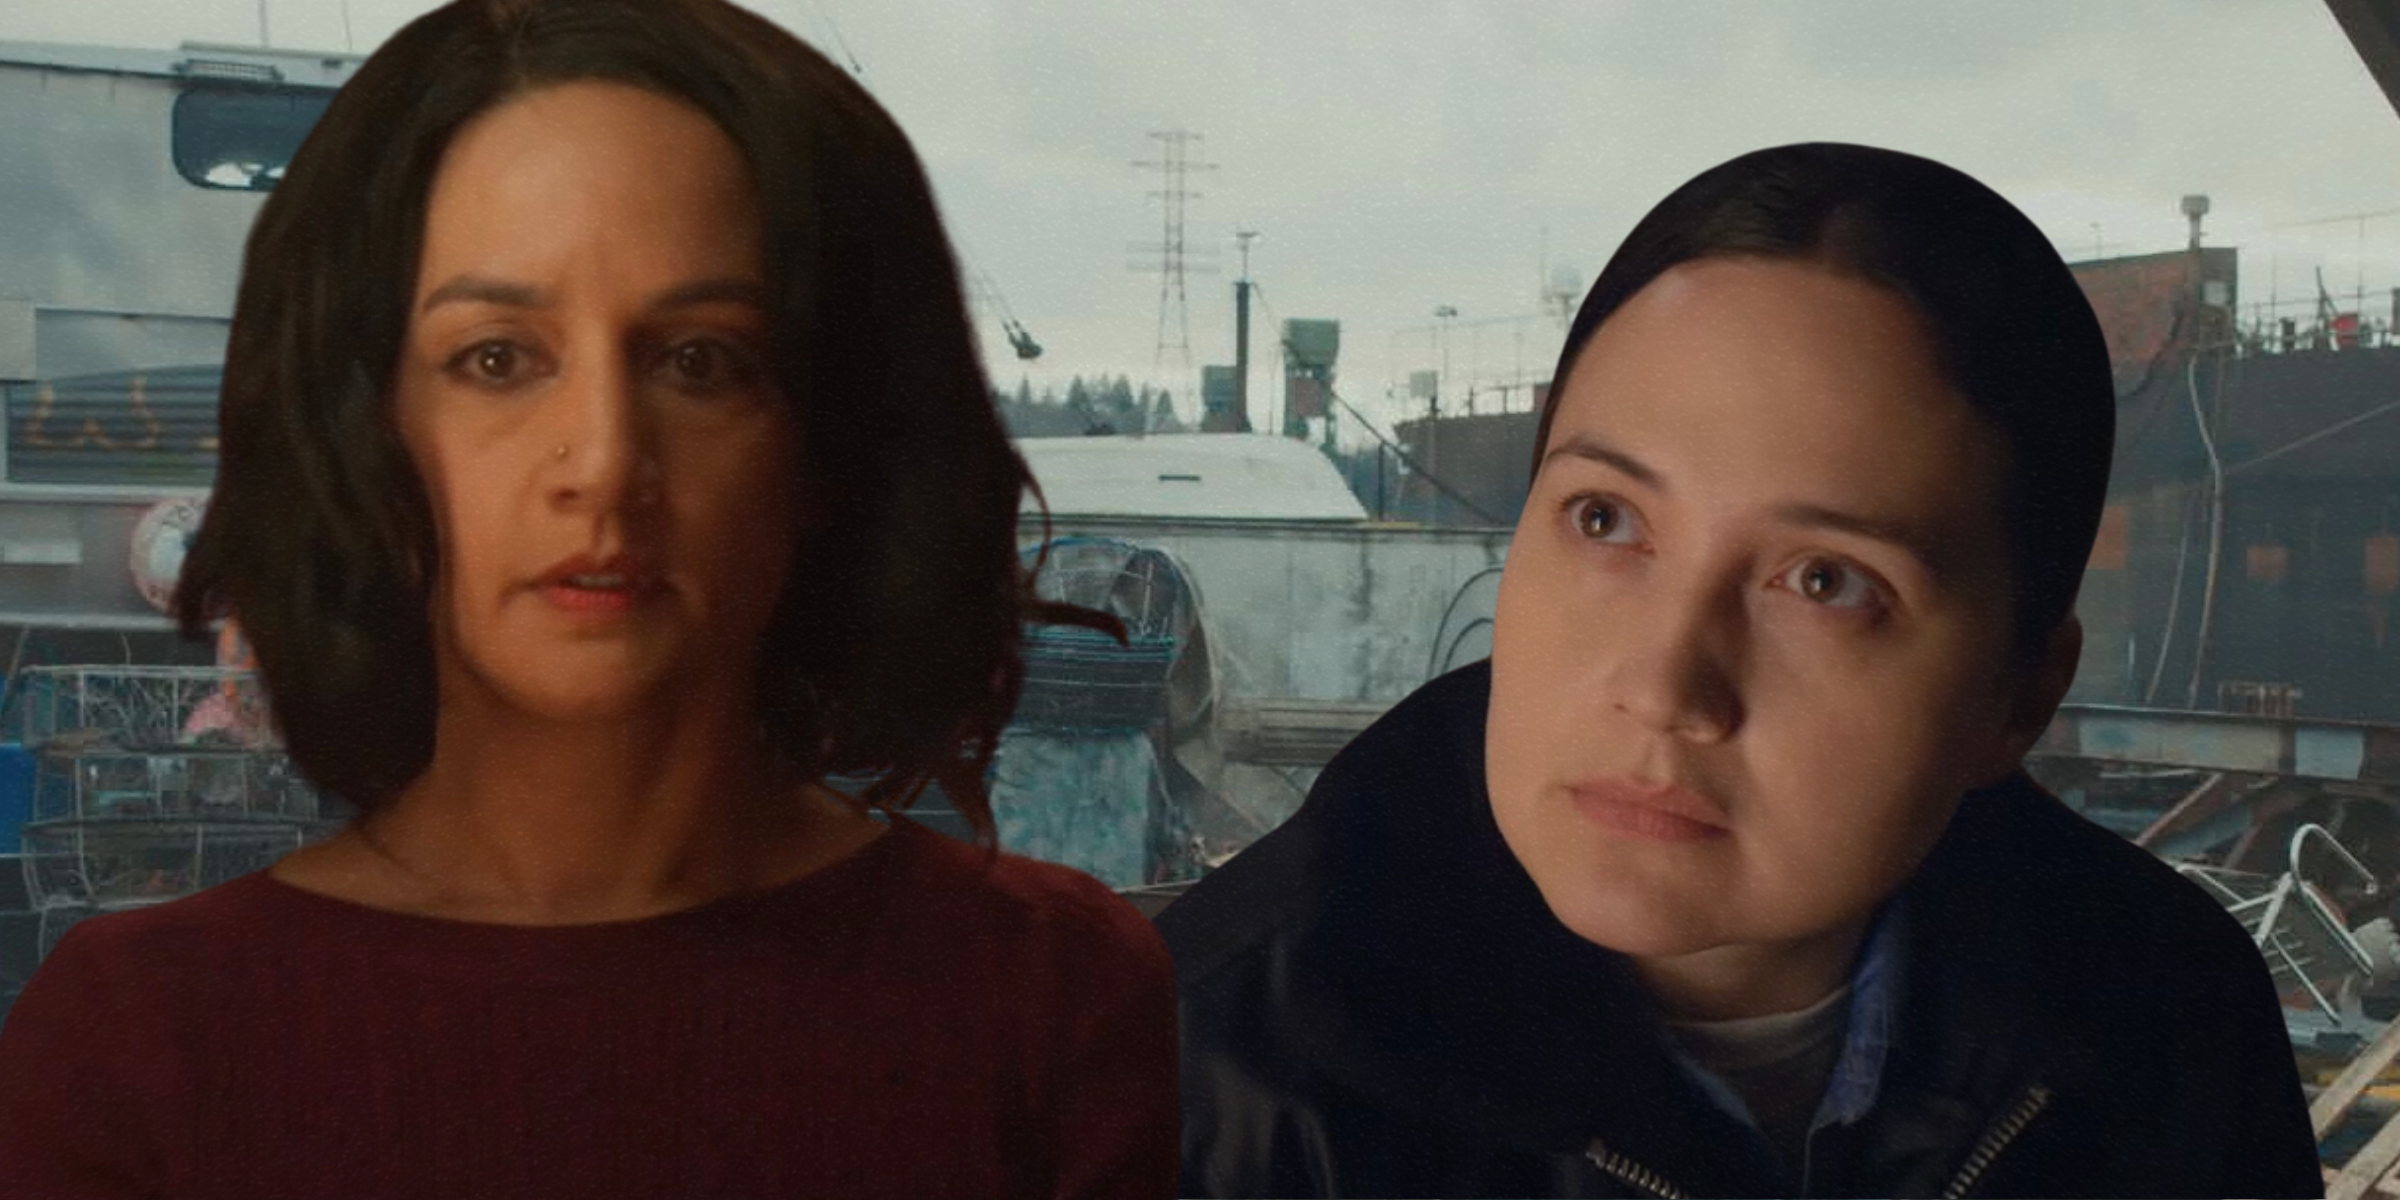 A collage of Archie Panjabi and Lily Gladstone in their new series "Under the Bridge"